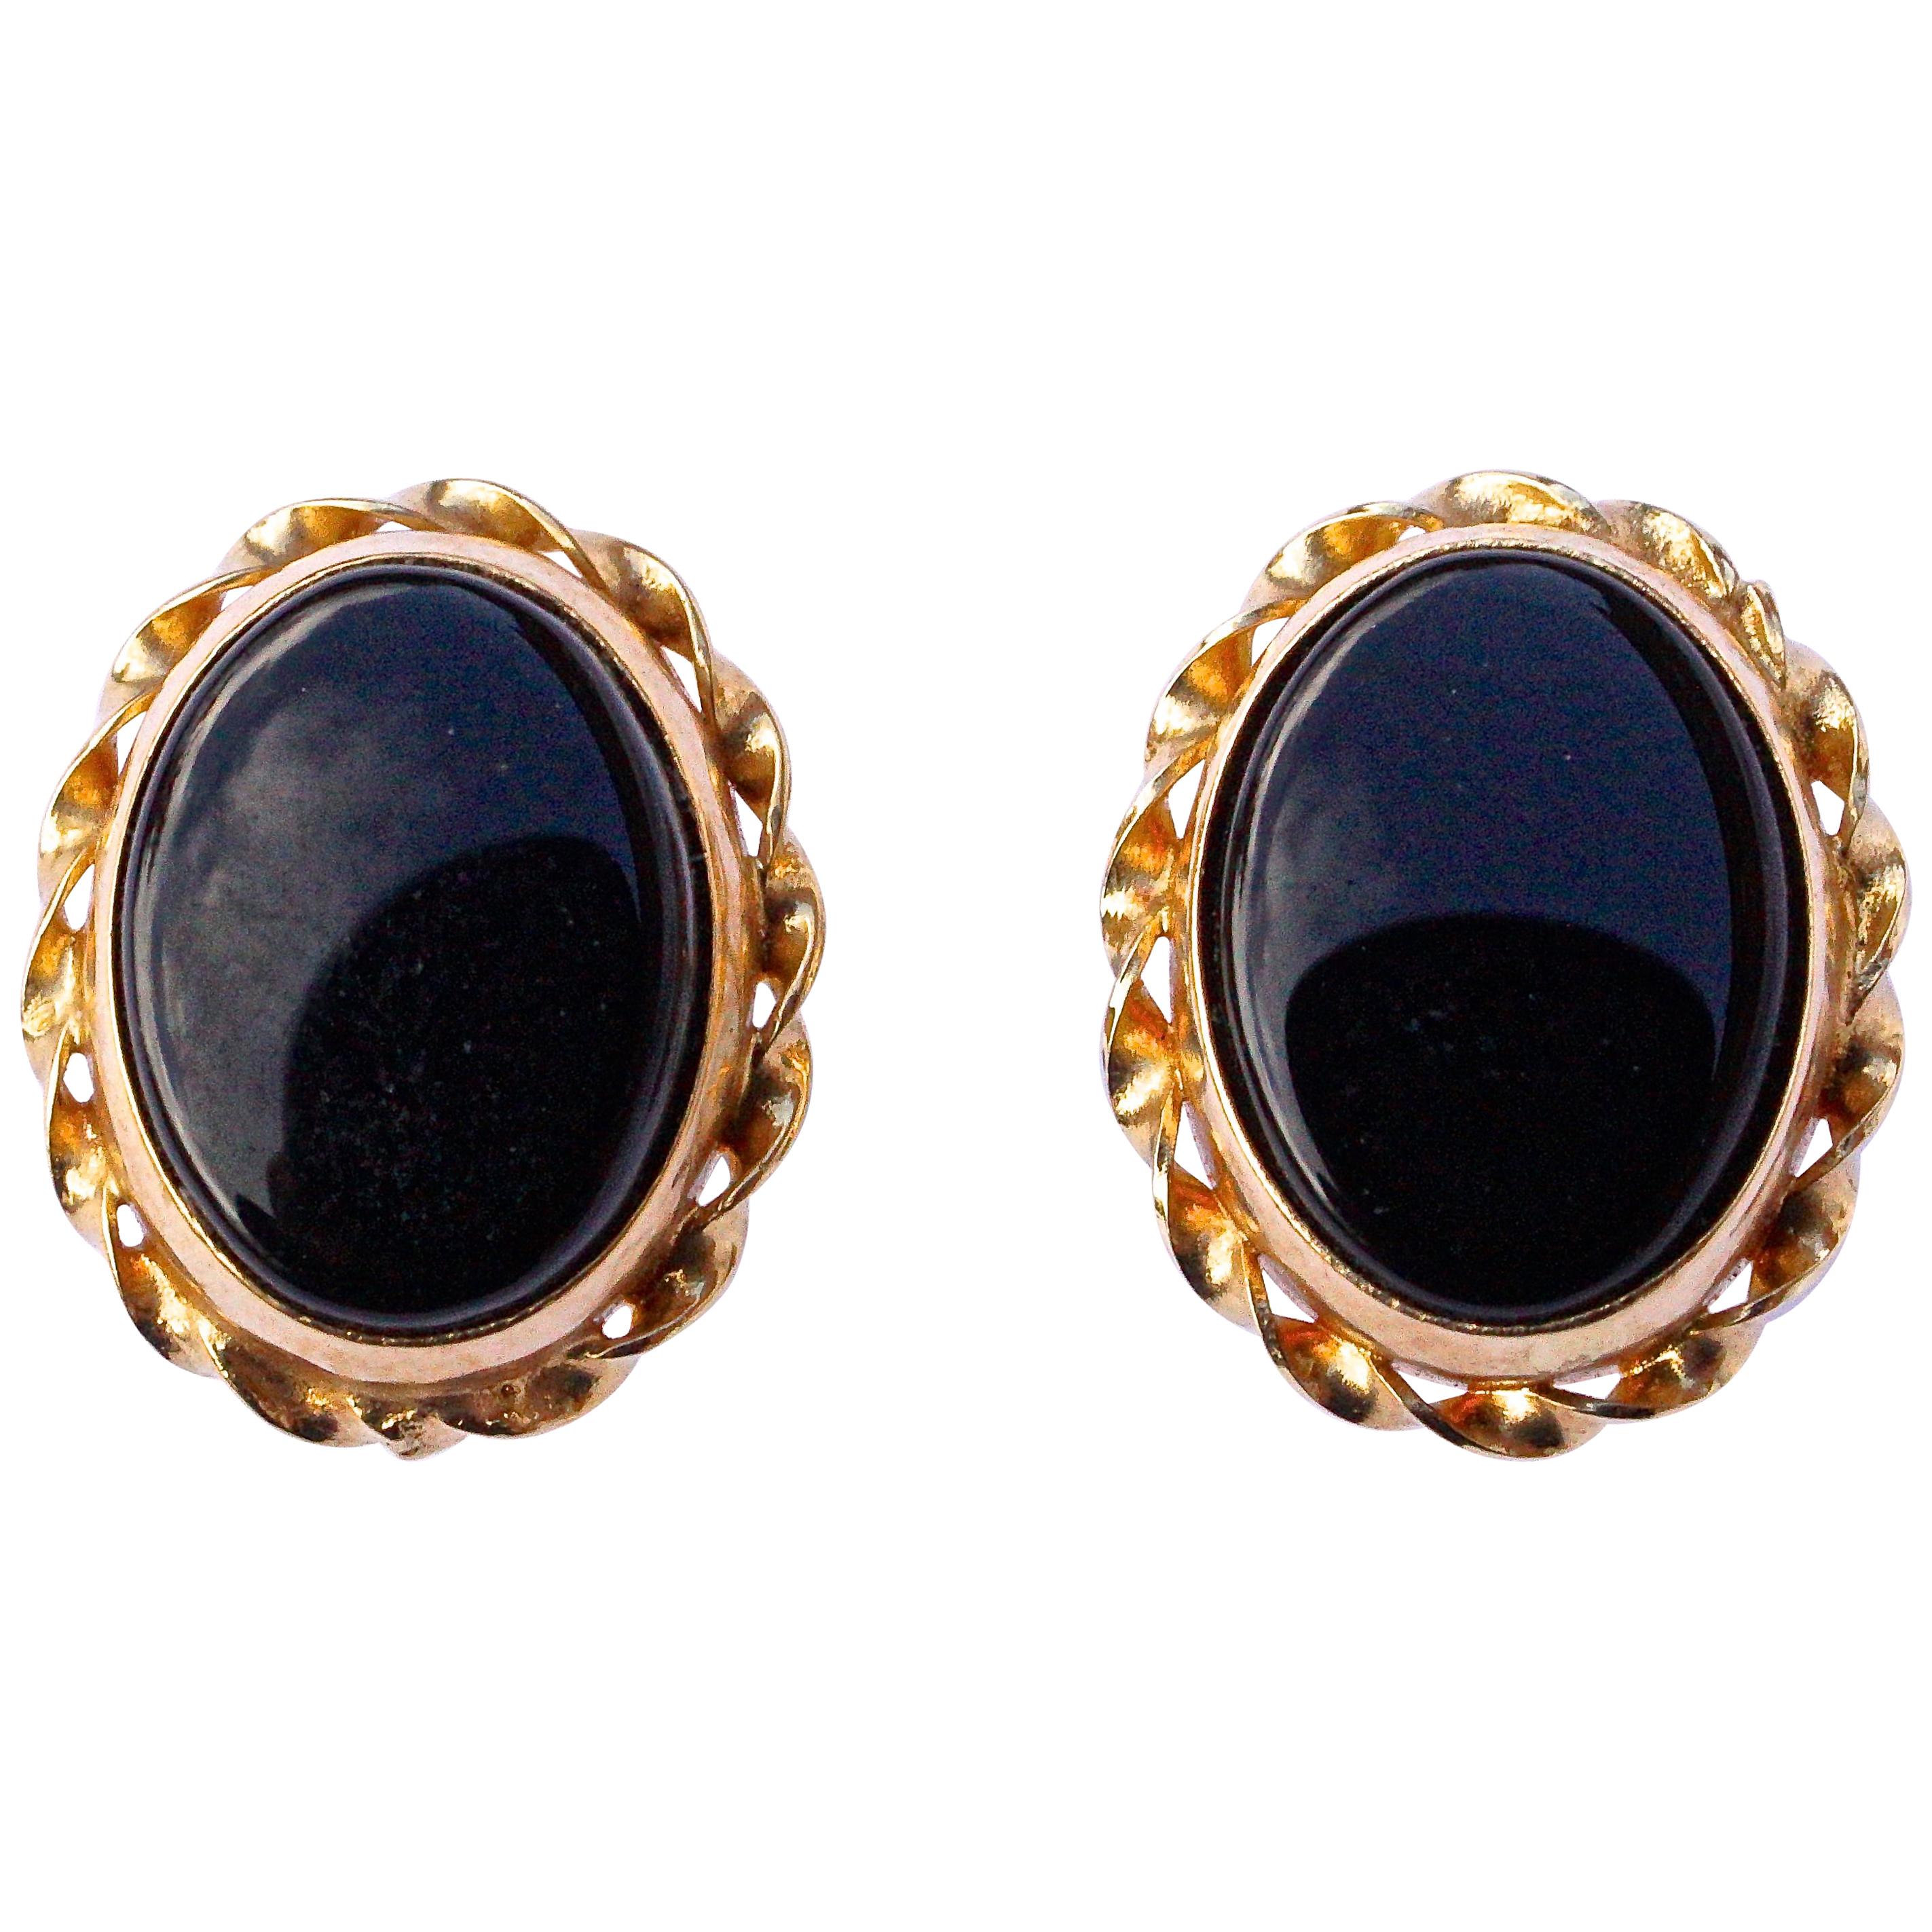 ZZ 14K Gold and Onyx Oval Stud Earrings with Gold Braided Edging